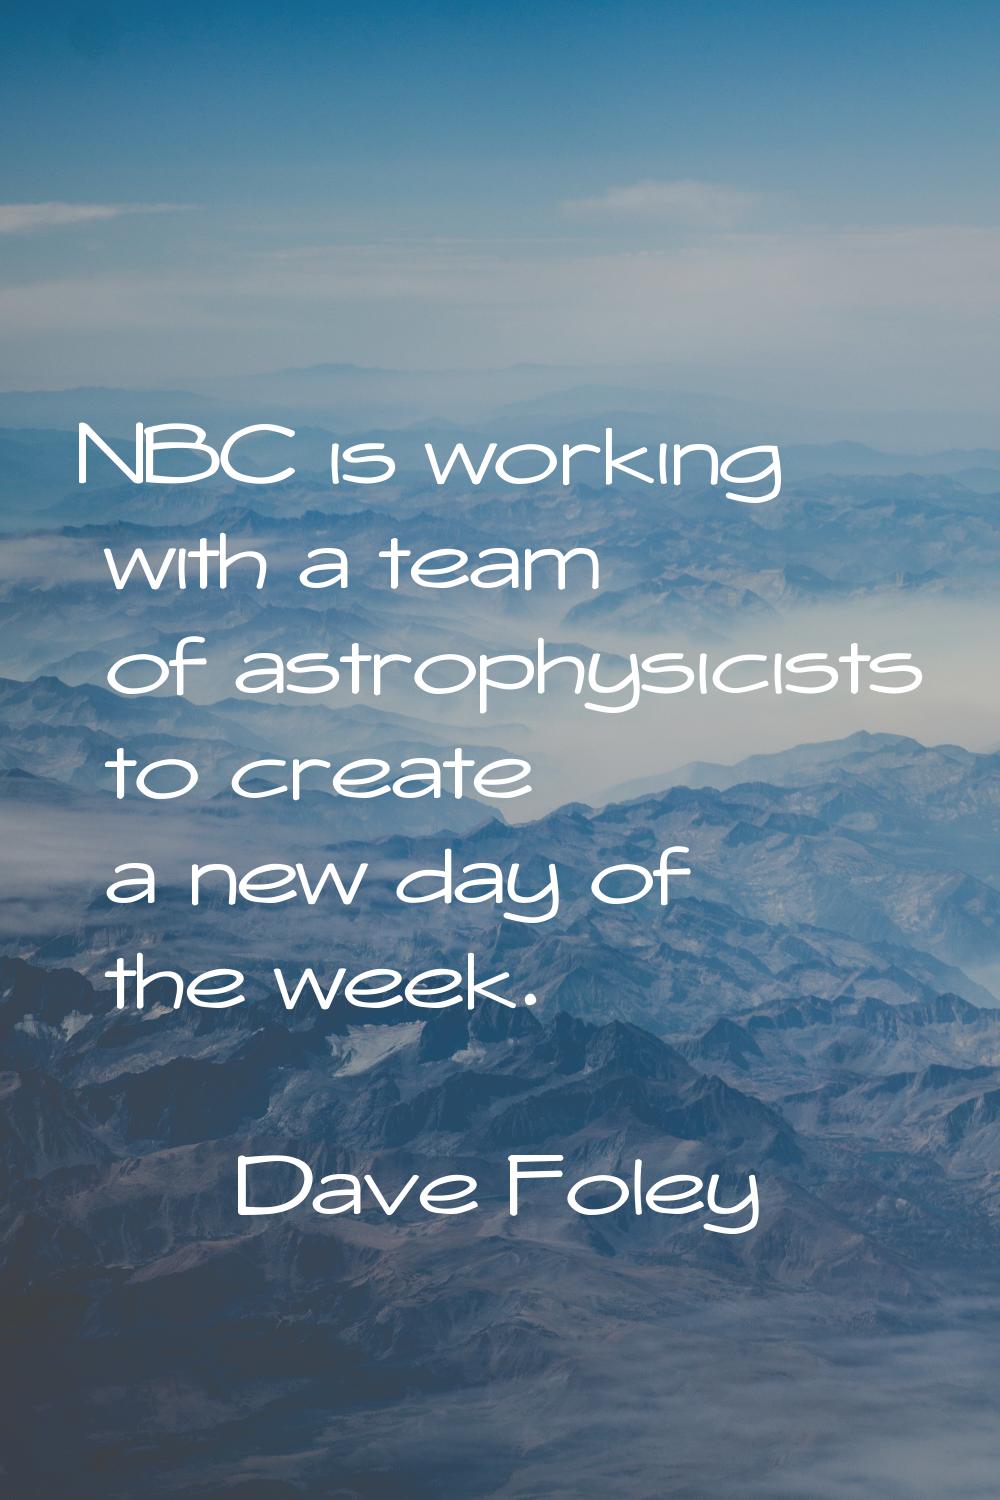 NBC is working with a team of astrophysicists to create a new day of the week.